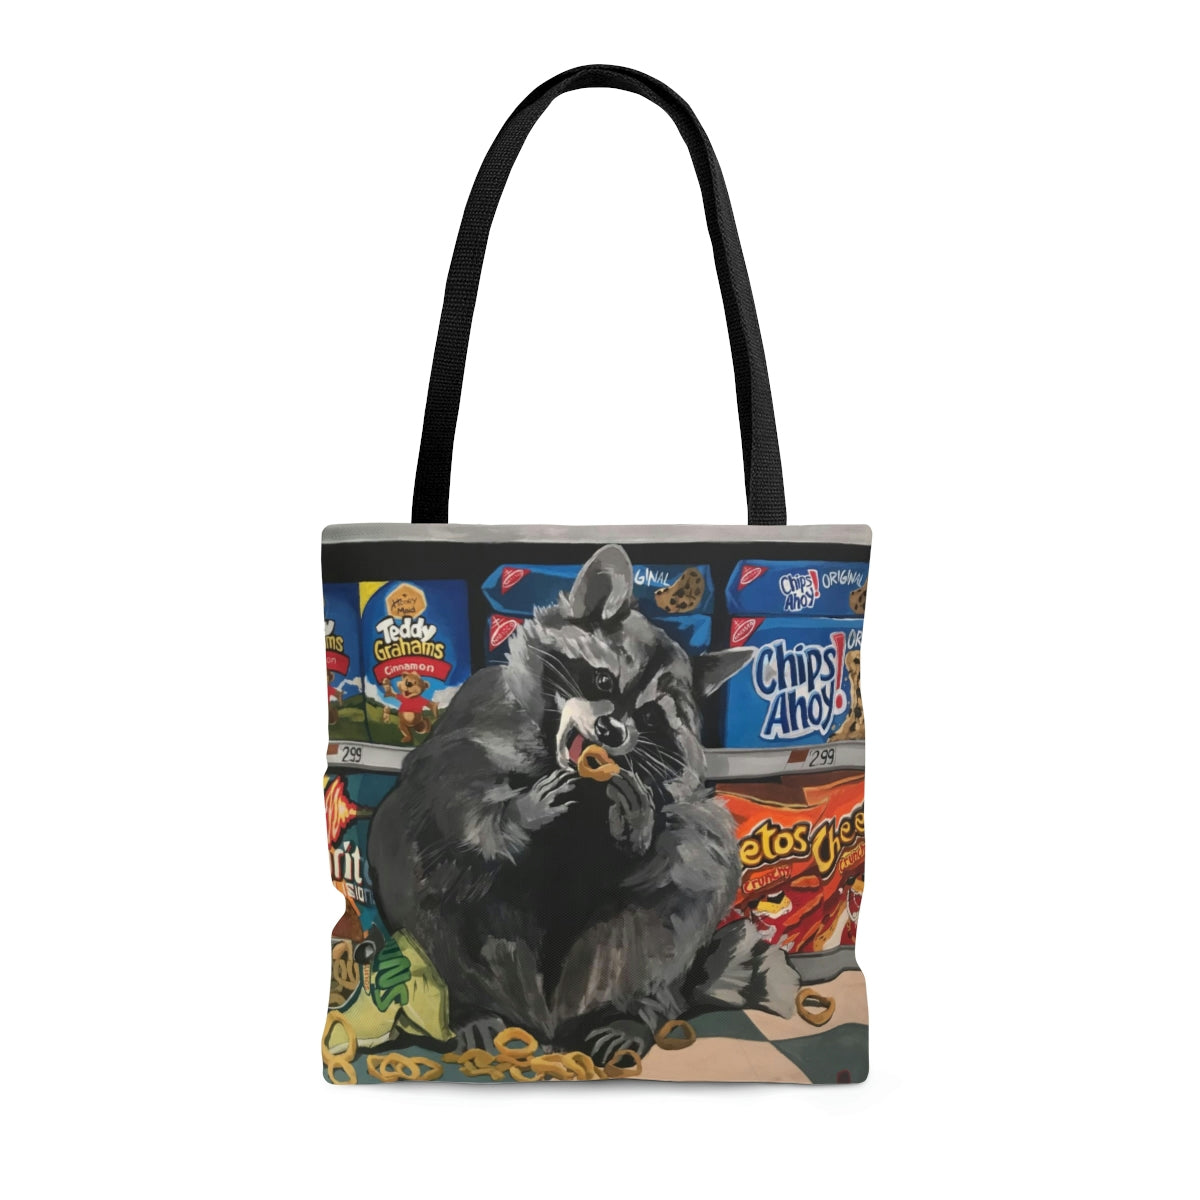 Clean Up On Asile 12 Tote bag tote bag Flyn_Costello_Art   